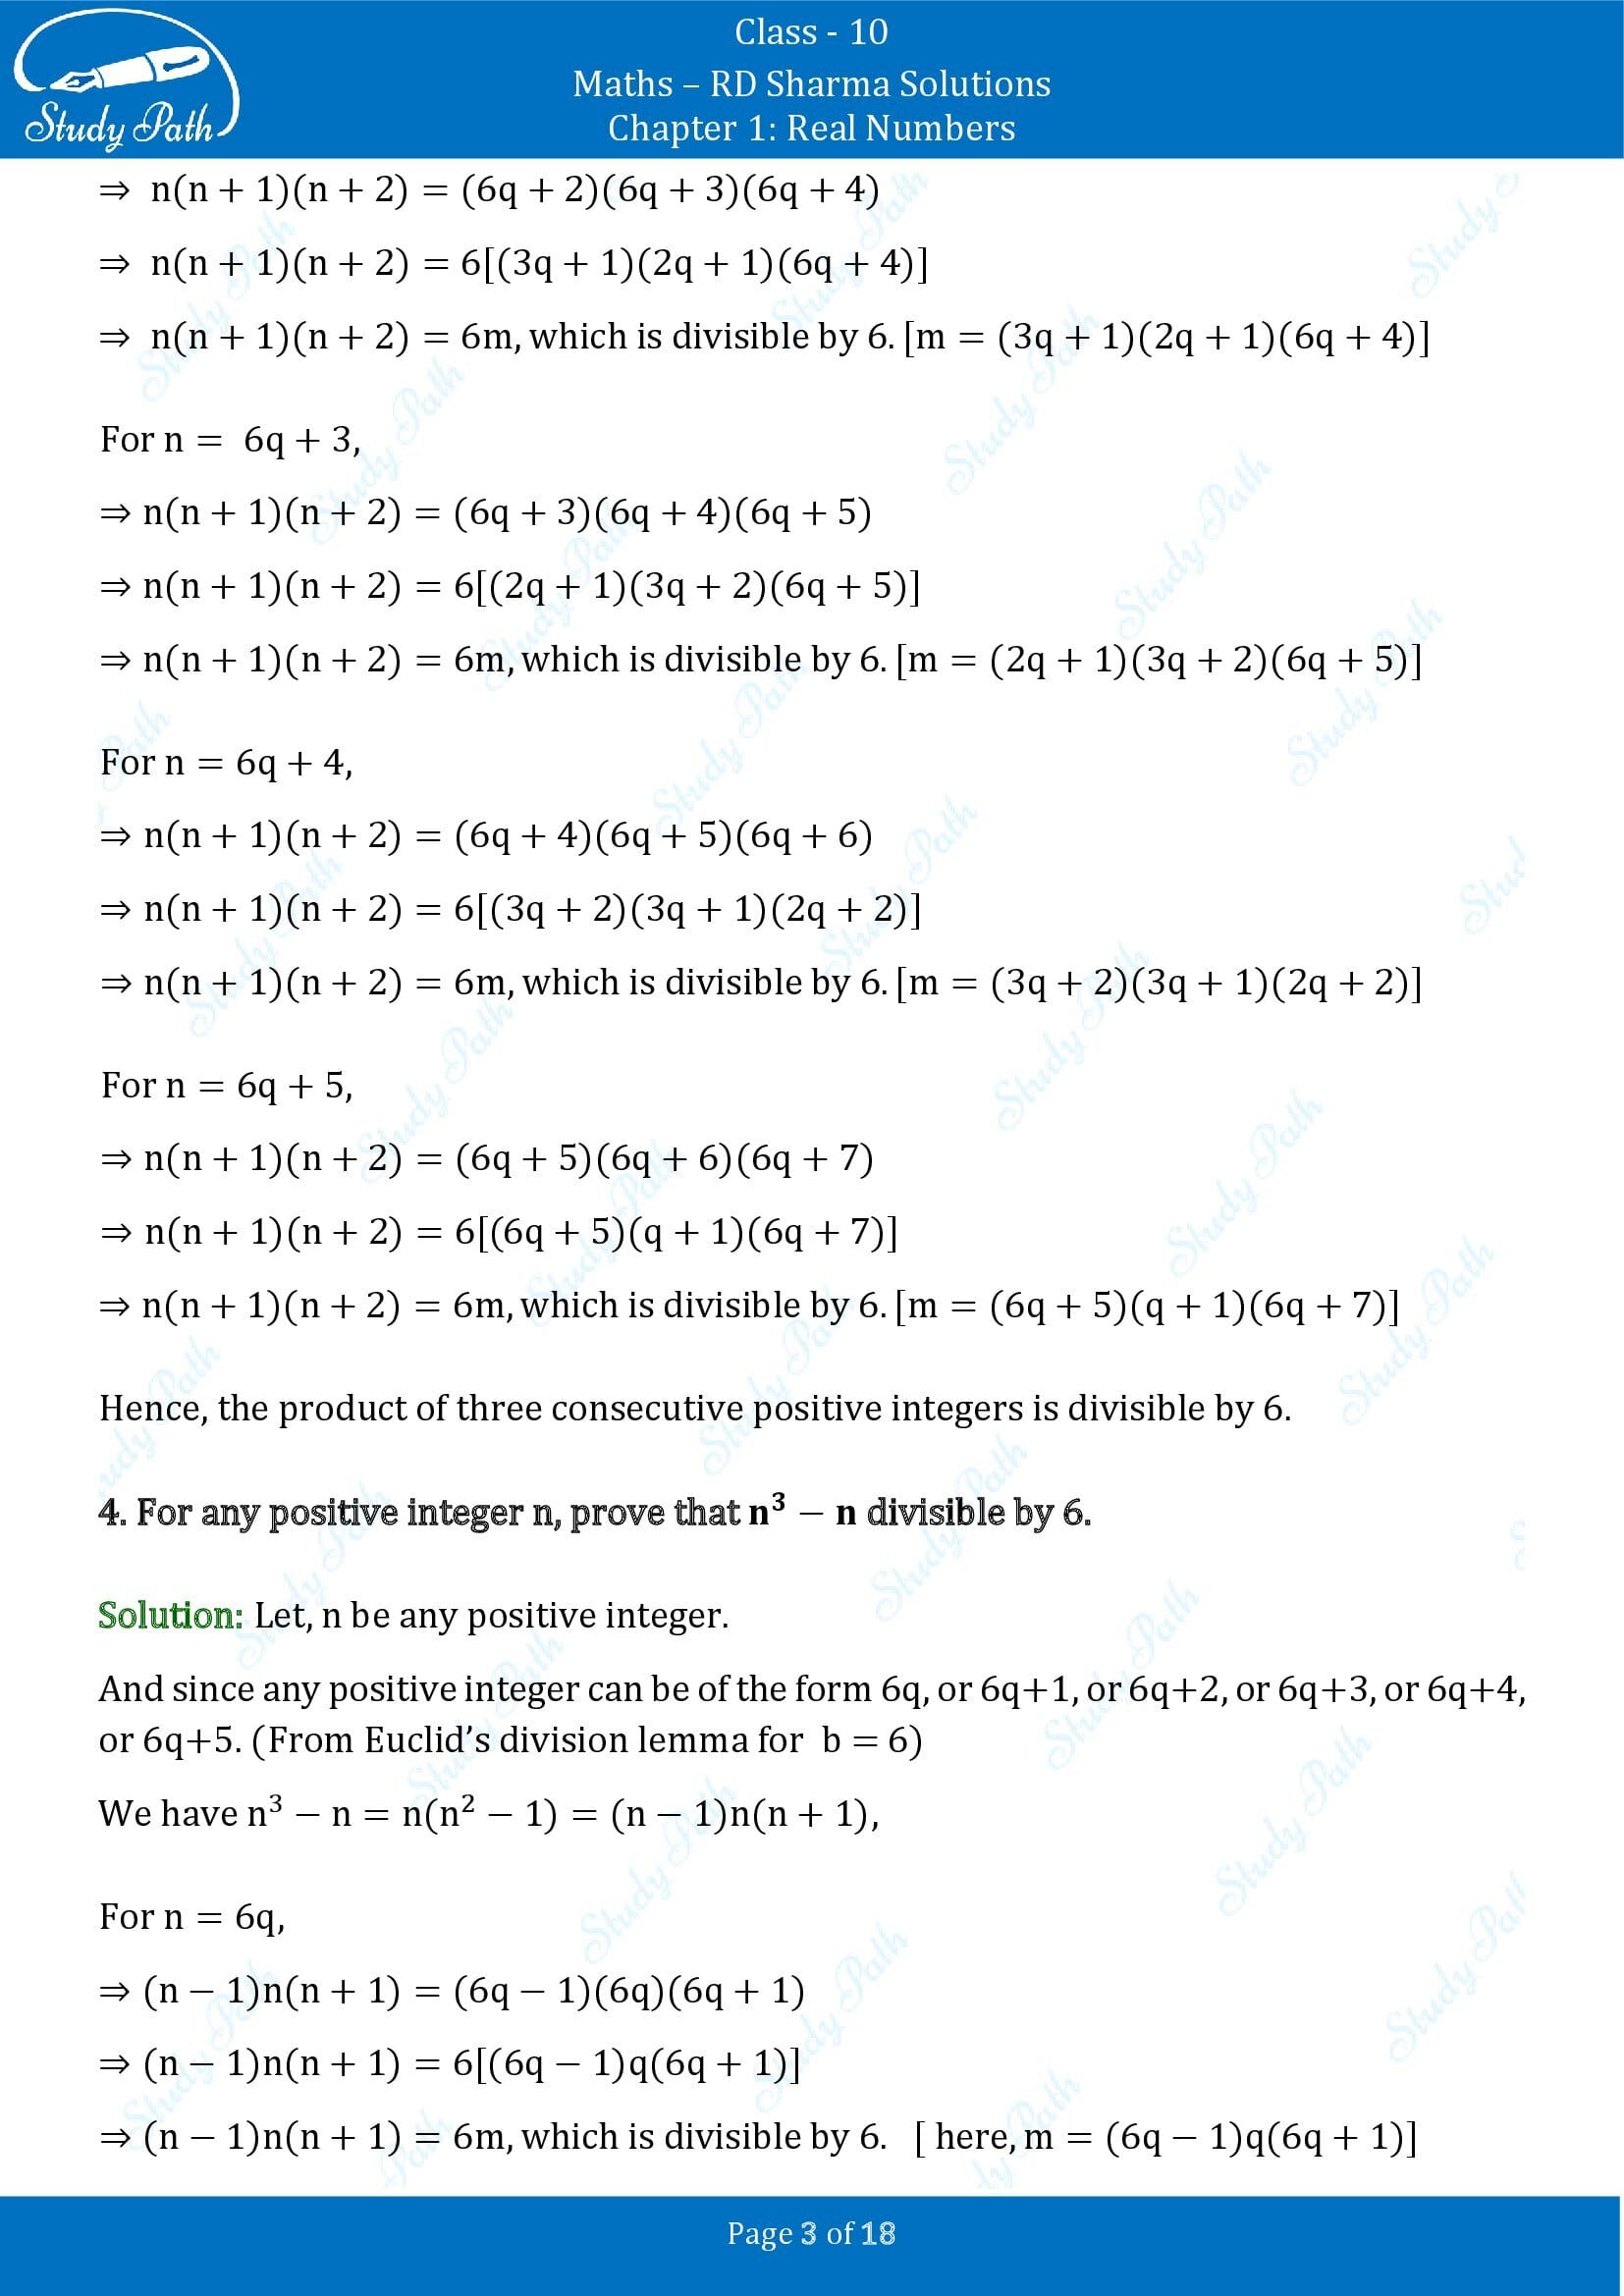 RD Sharma Solutions Class 10 Chapter 1 Real Numbers Exercise 1.1 00003